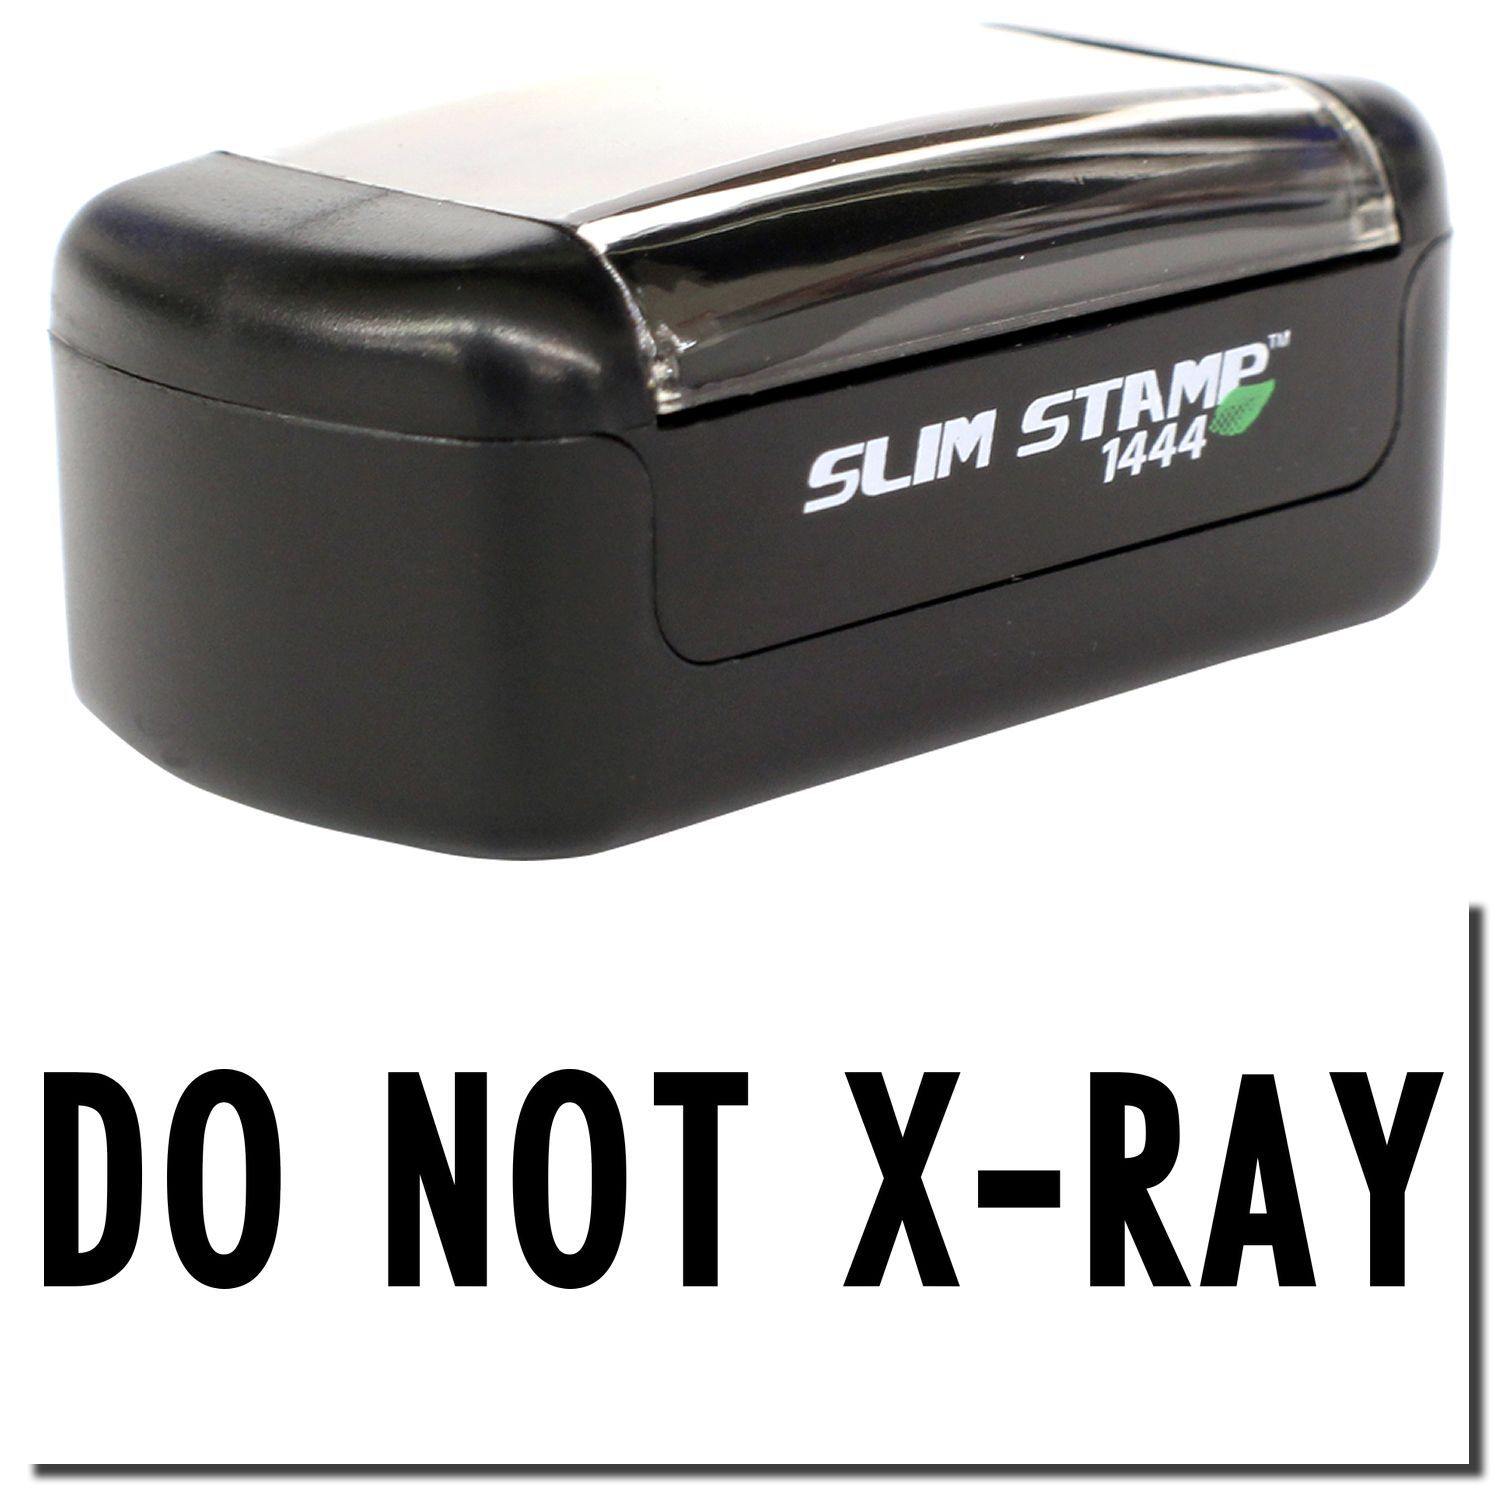 A stock office pre-inked stamp with a stamped image showing how the text "DO NOT X-RAY" is displayed after stamping.